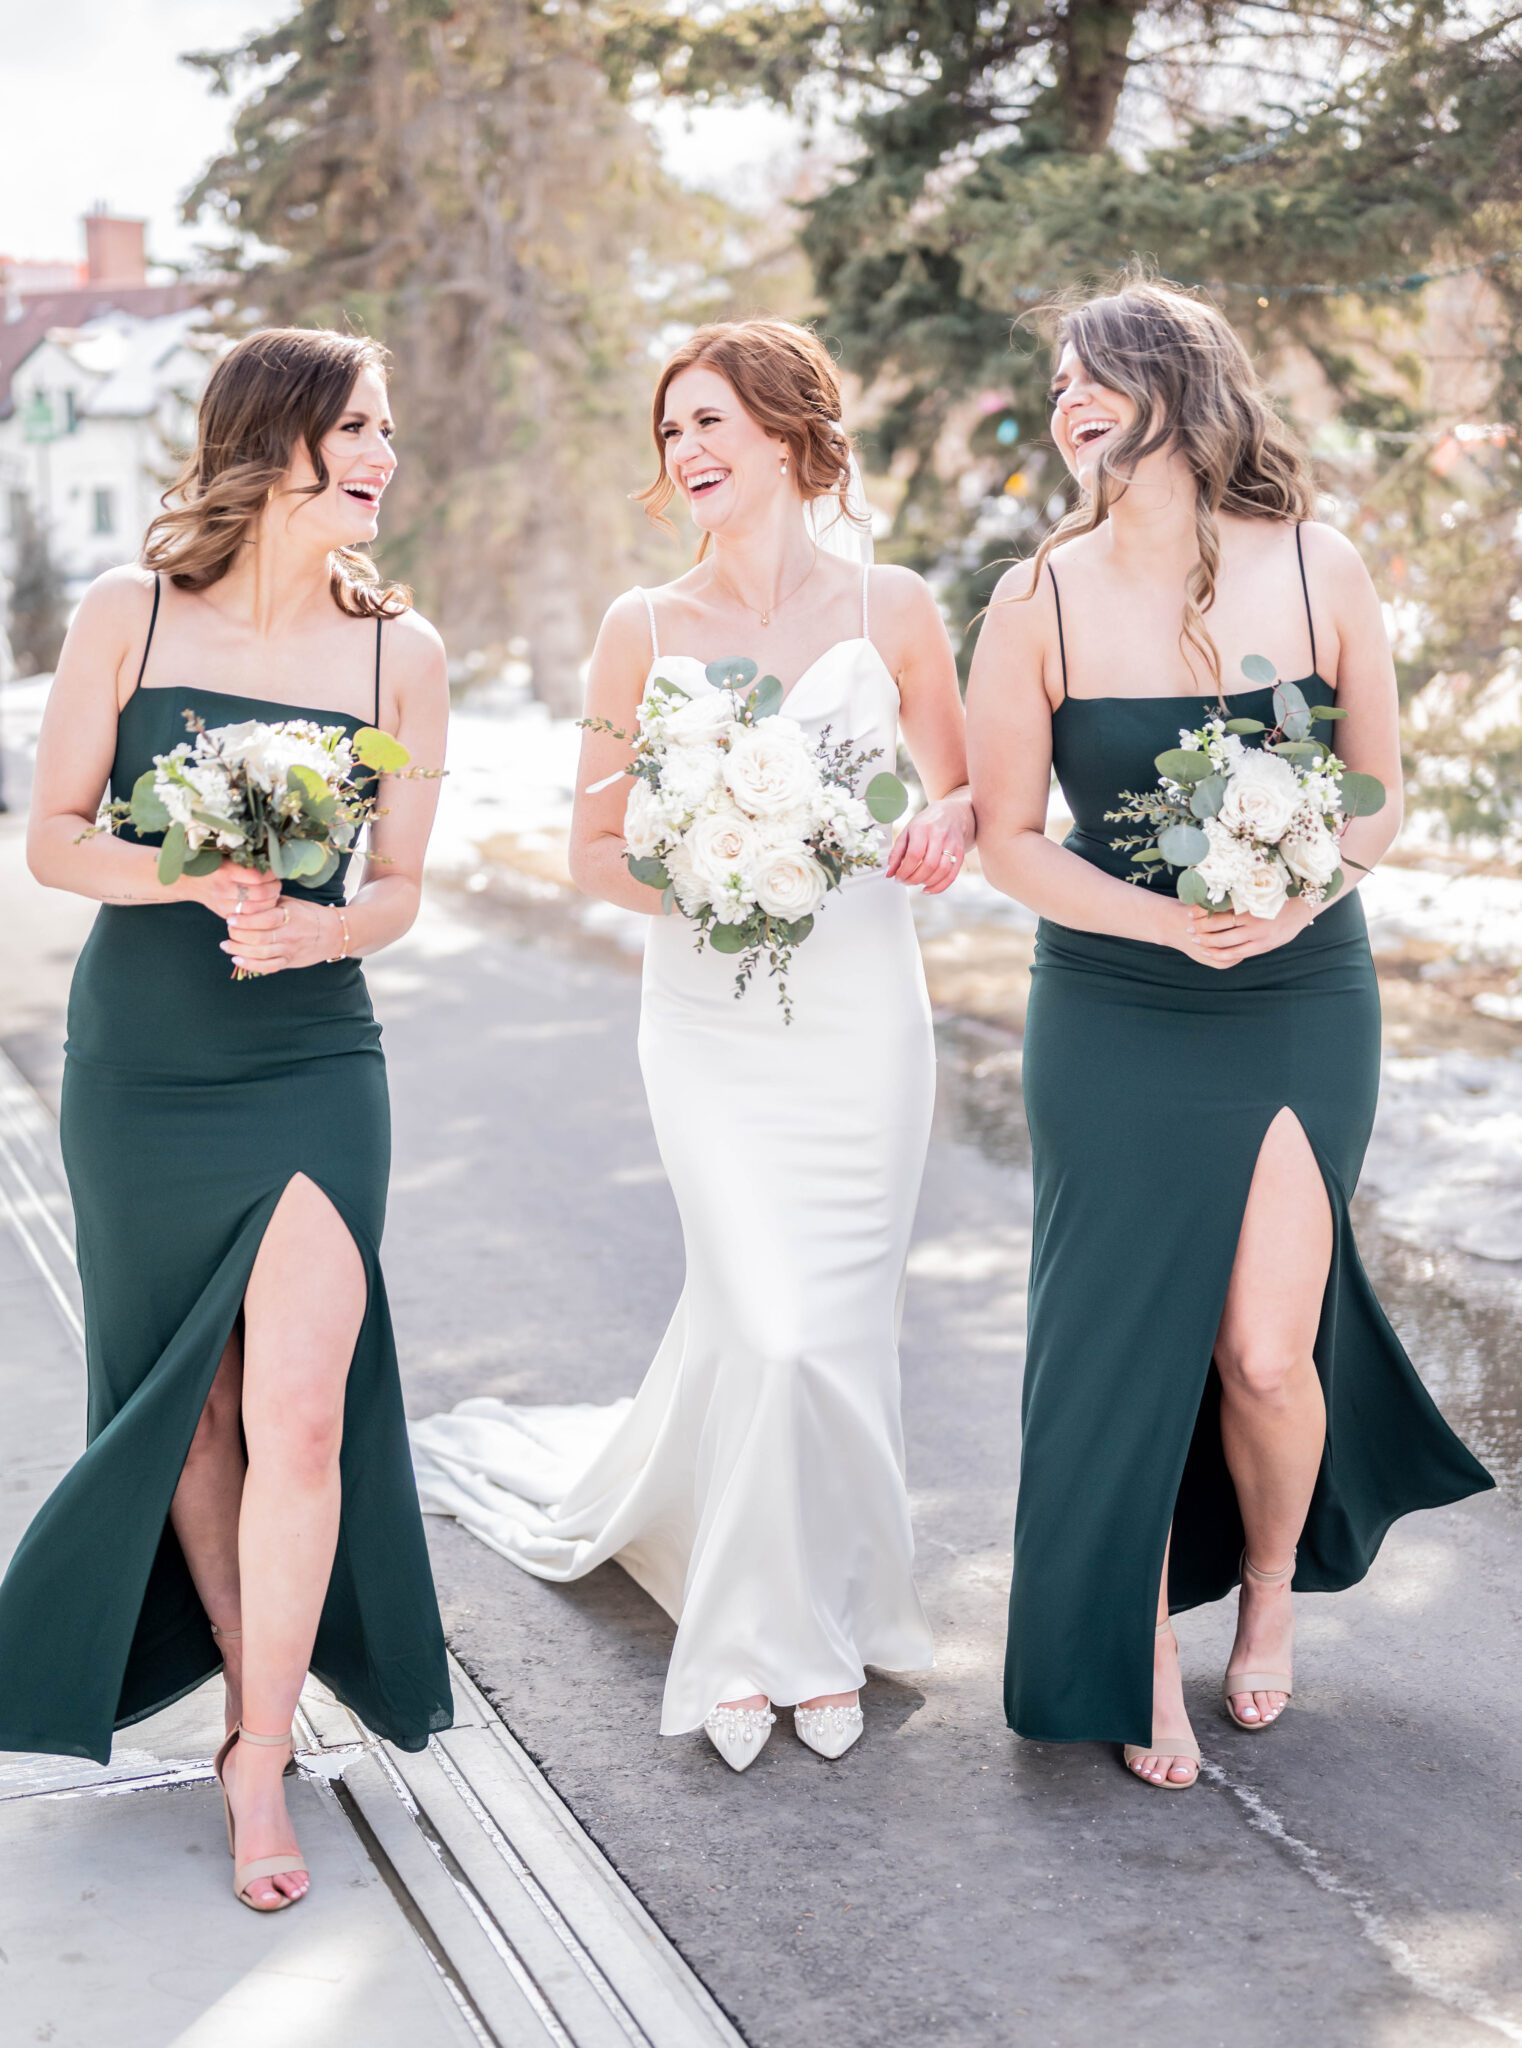 Bride and bridesmaids walk down path near the wedding venue, holding classic white floral bouquets. Bridesmaids are seen wearing emerald coloured gowns from Park and Fifth, bridesmaid photo inspiration.